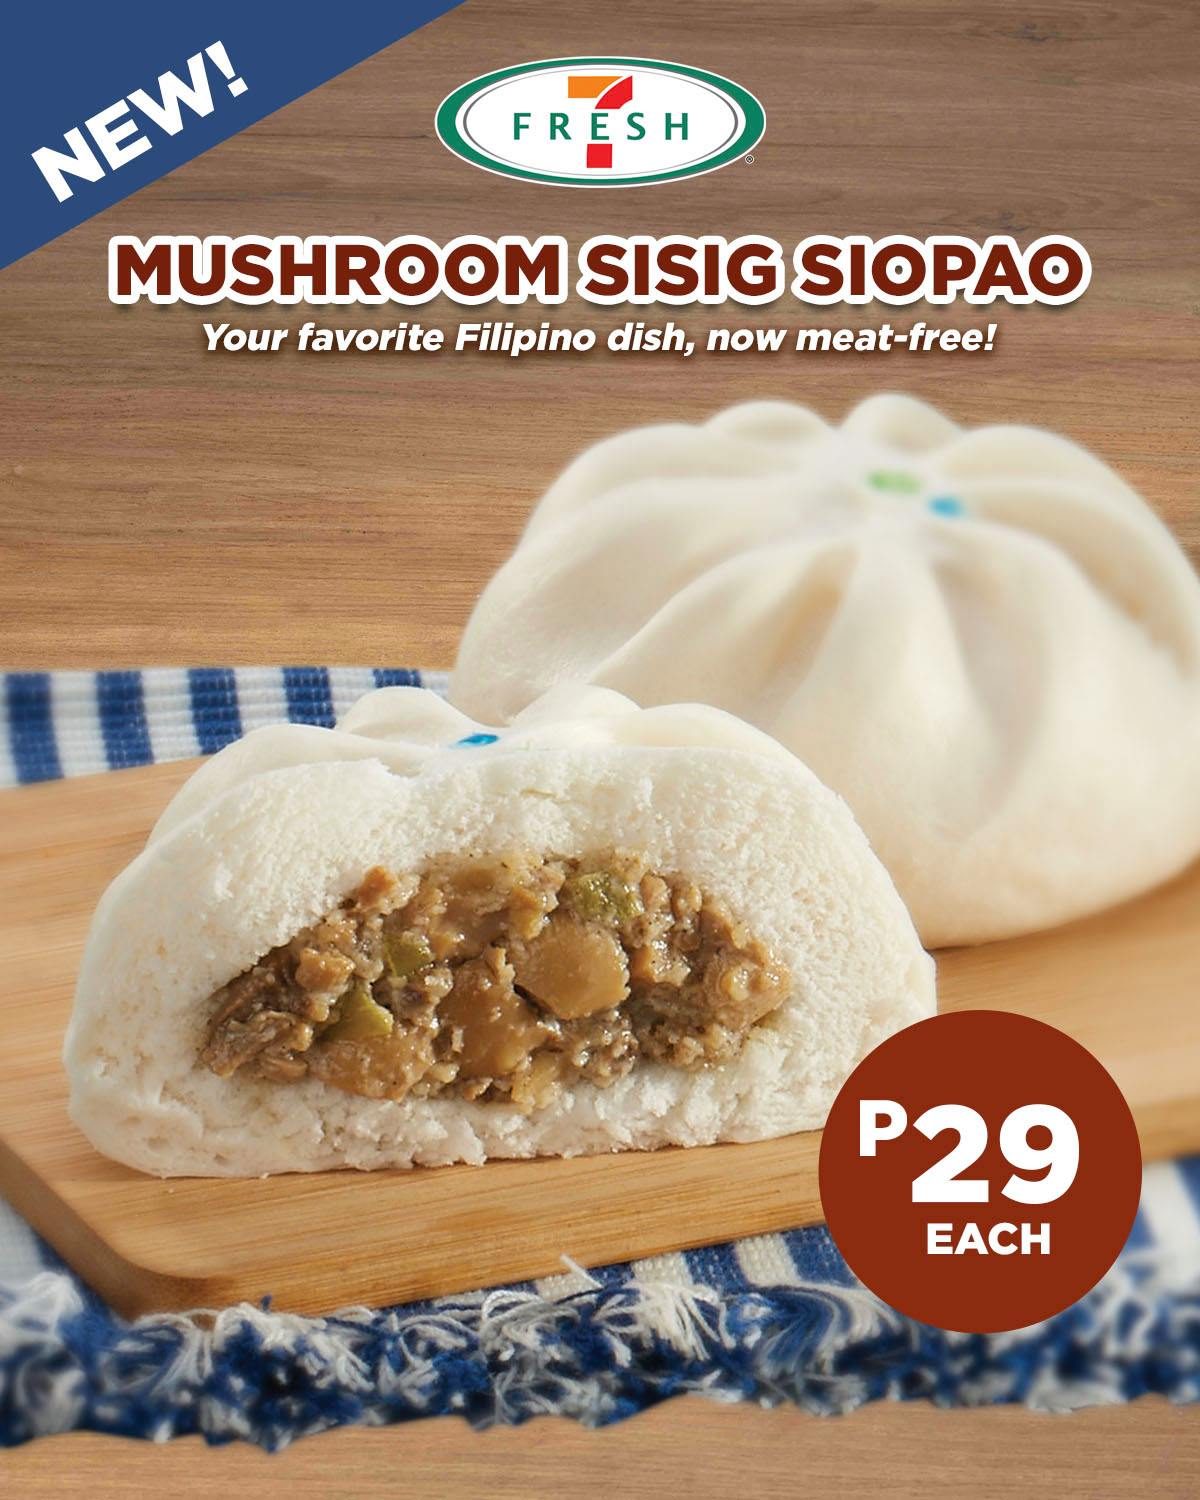 7-Eleven now offers meat-free mushroom siopao in Mindanao stores